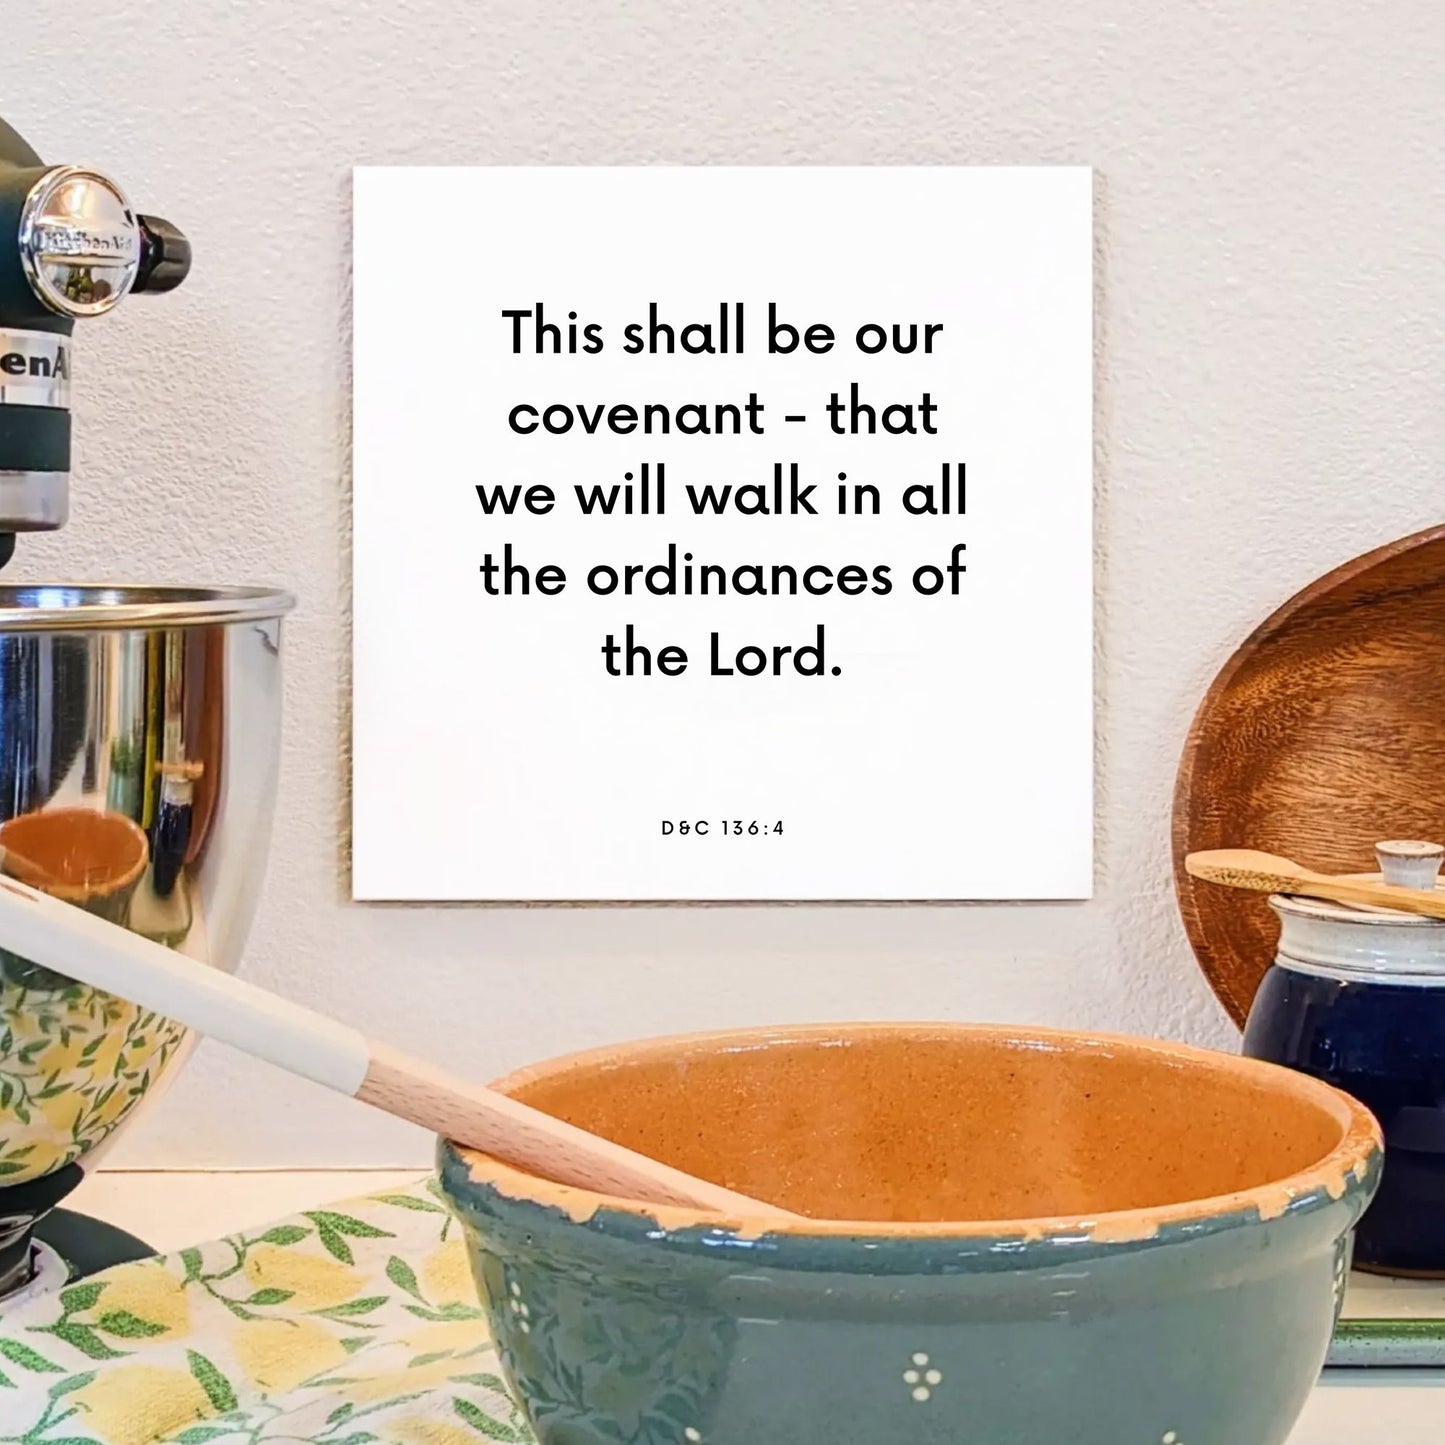 Kitchen mouting of the scripture tile for D&C 136:4 - "We will walk in all the ordinances of the Lord"